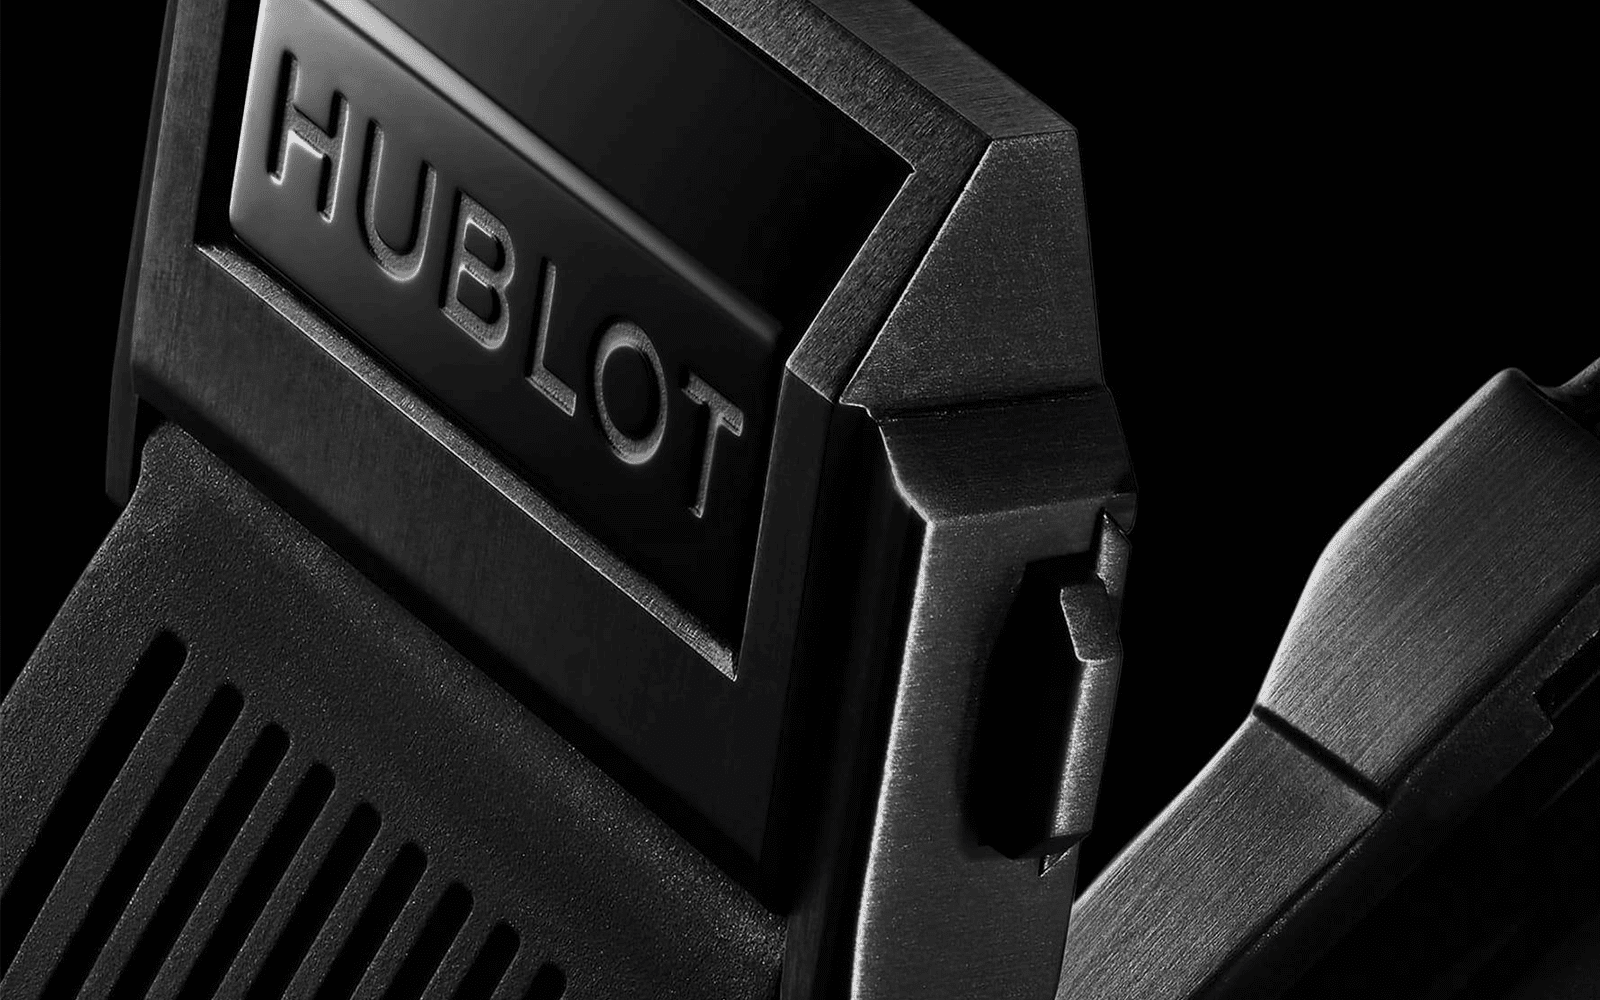 Hublot Pin Buckle and Rubber Strap.